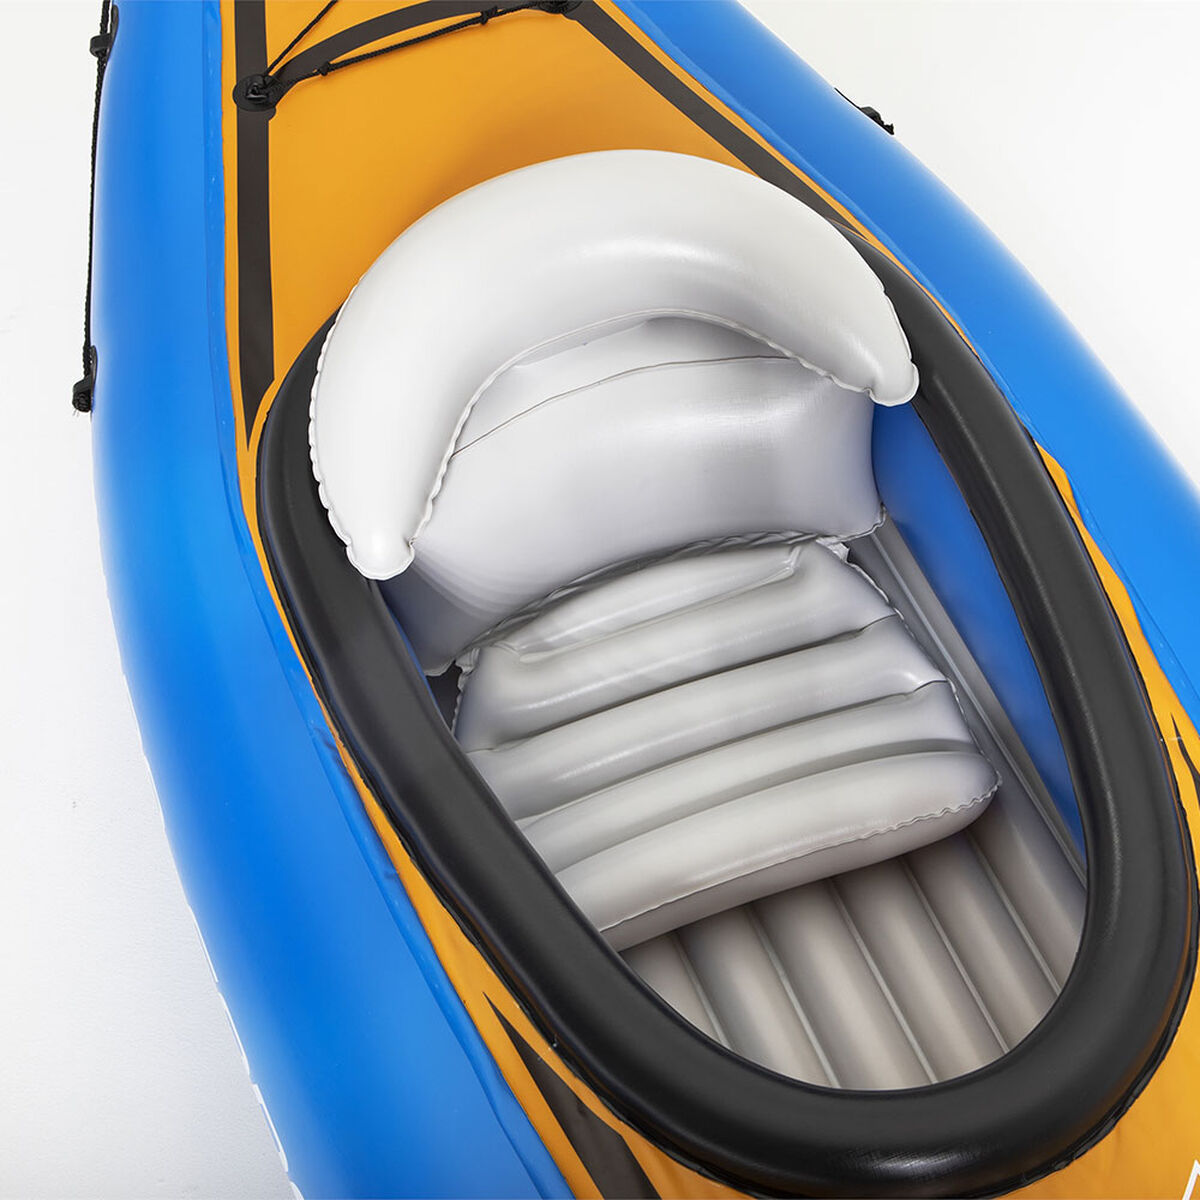 Kayak Inflable Bestway Cove 1 Persona